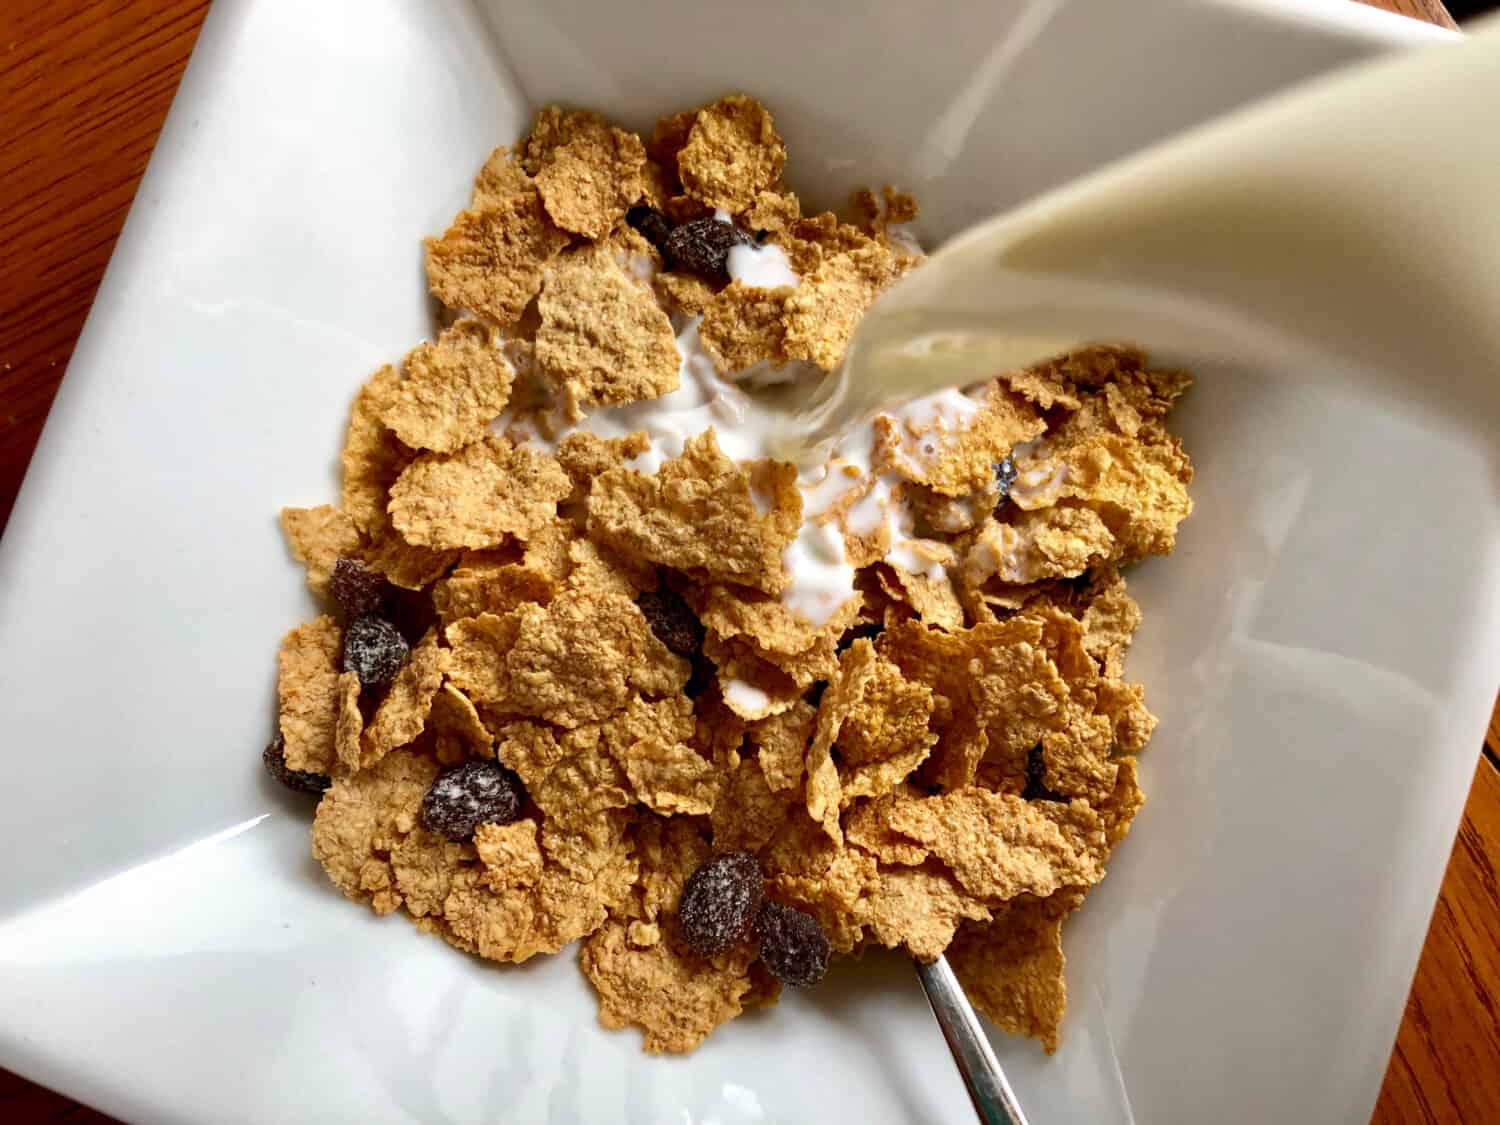 Milk being poured into a bowl of Raisin Bran